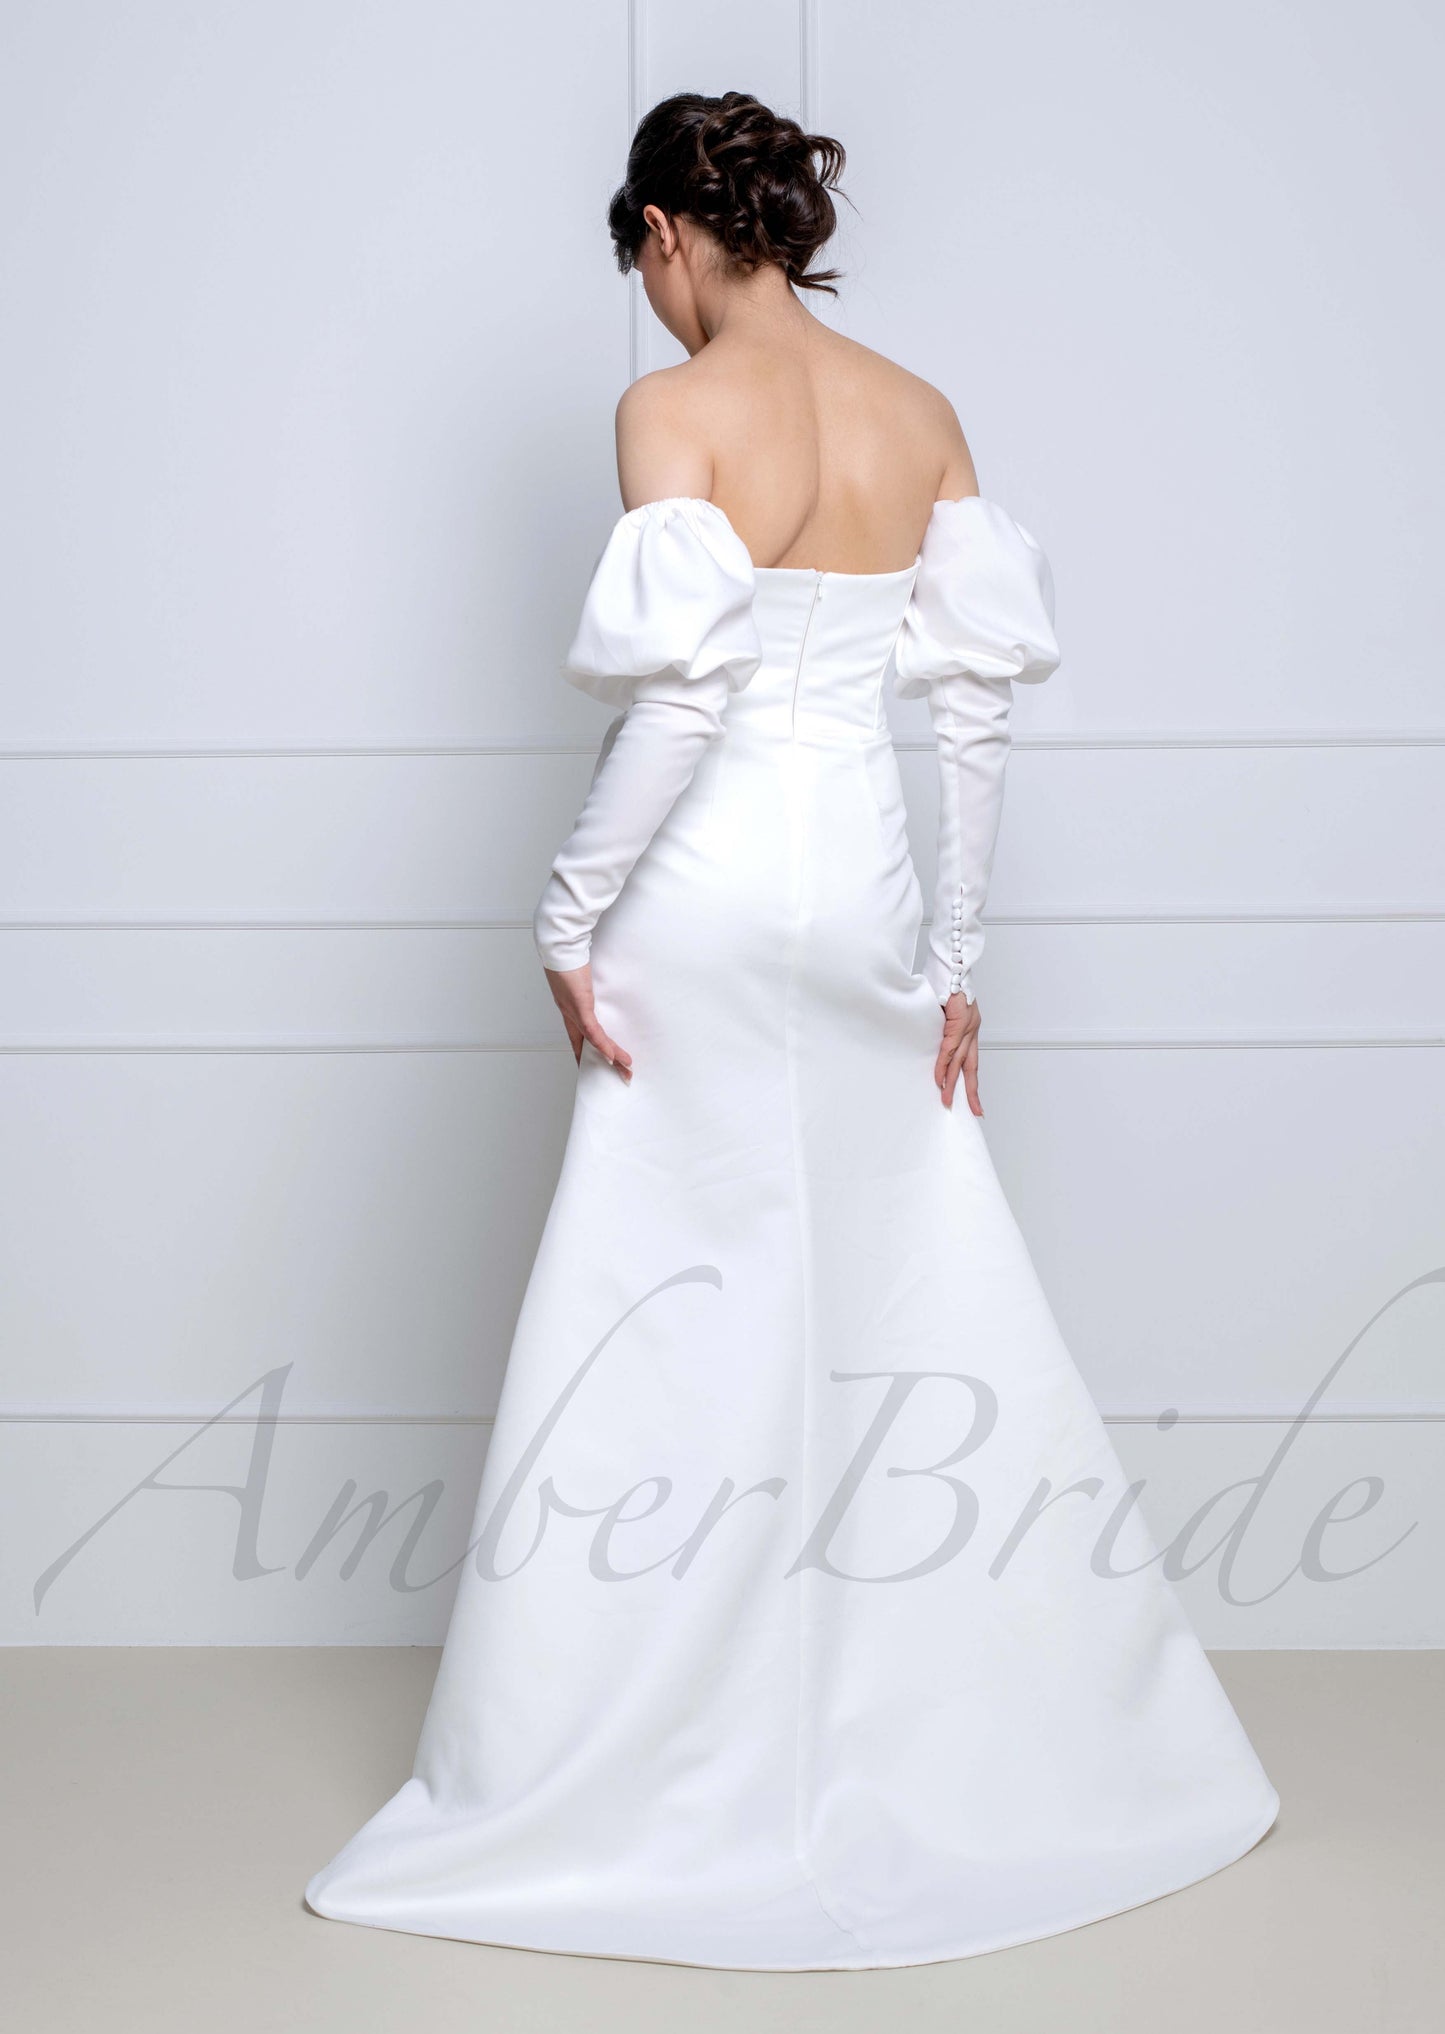 Exquisite Satin Wedding Dress with Overskirt and Detachable Bishop Sleeves